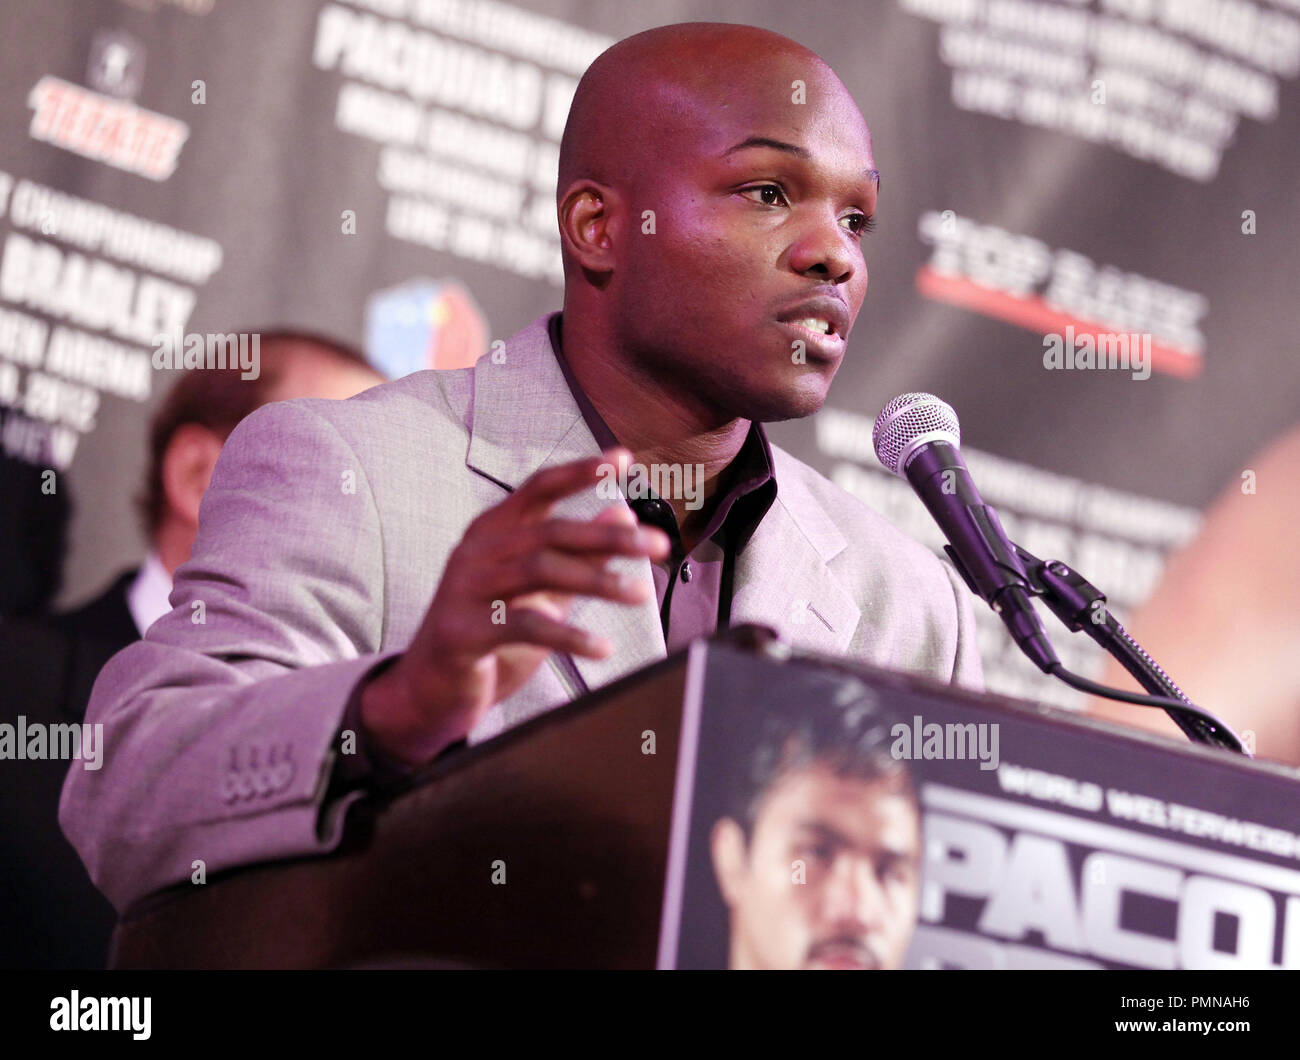 Timothy Bradley at the MANNY PACQUIAO & TIMOTHY BRADLEY Los Angeles News Conference Luncheon announcing their world championship fight held at The Beverly Hills Hotel Crystal Ballroom in Beverly Hills, CA. The event took place on Tuesday, February 21, 2012. Photo by Eden Ari PRPP/ PictureLux Stock Photo